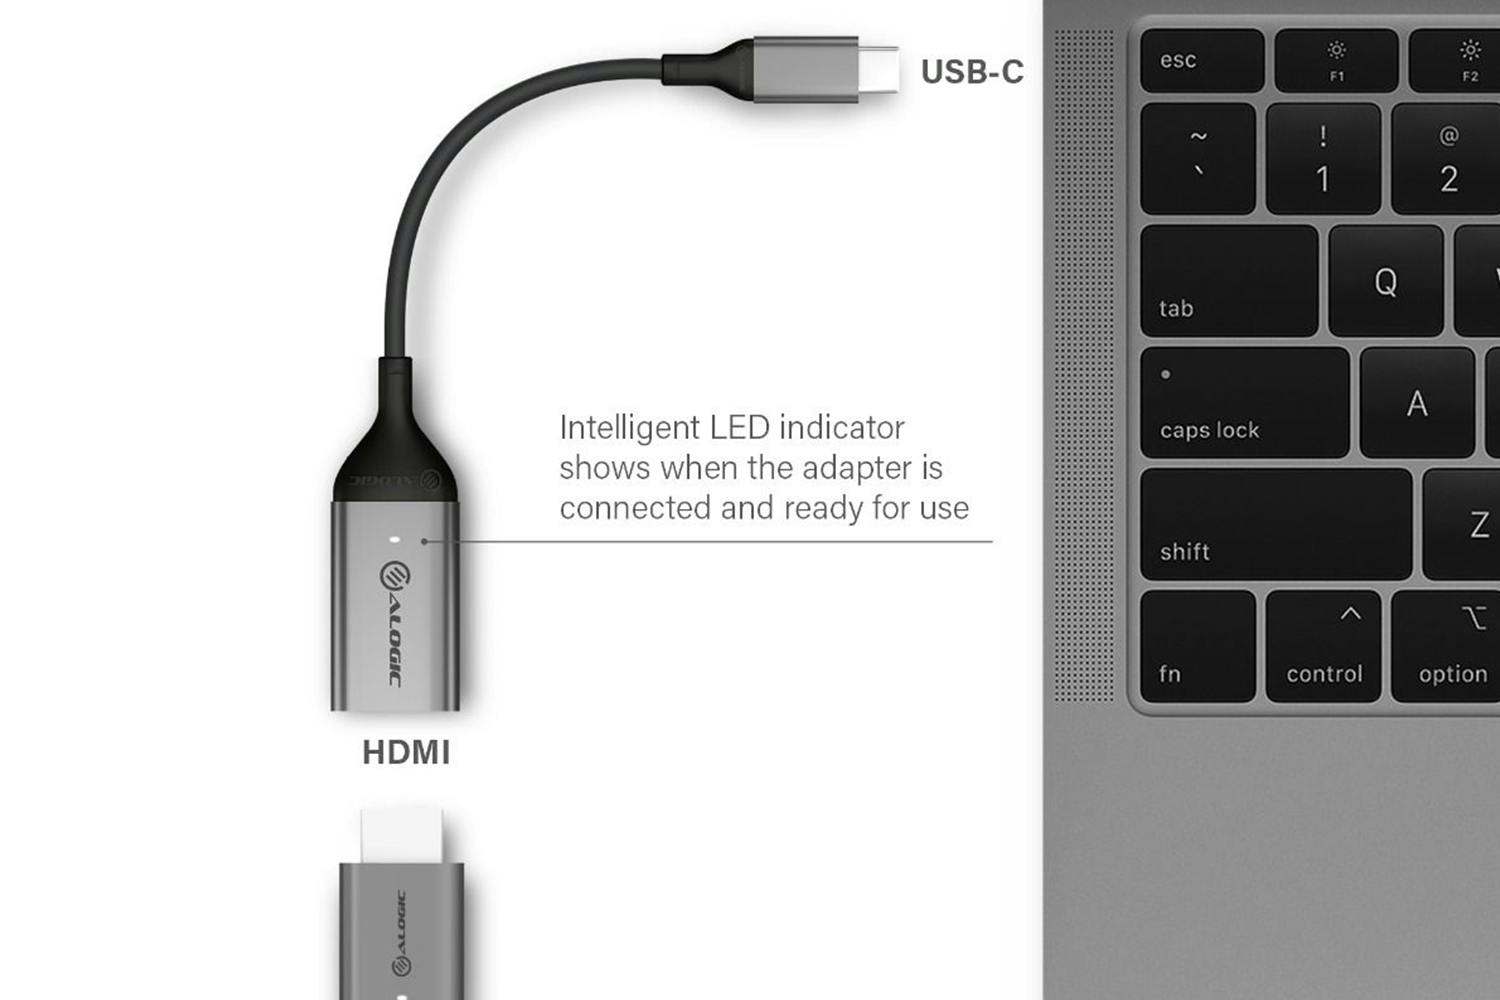 USB to HDMI Adapter Cable Cord - USB 2.0 Type A Male to HDMI Male Charging  Converter (Only for Charging) (1.5 Meter)